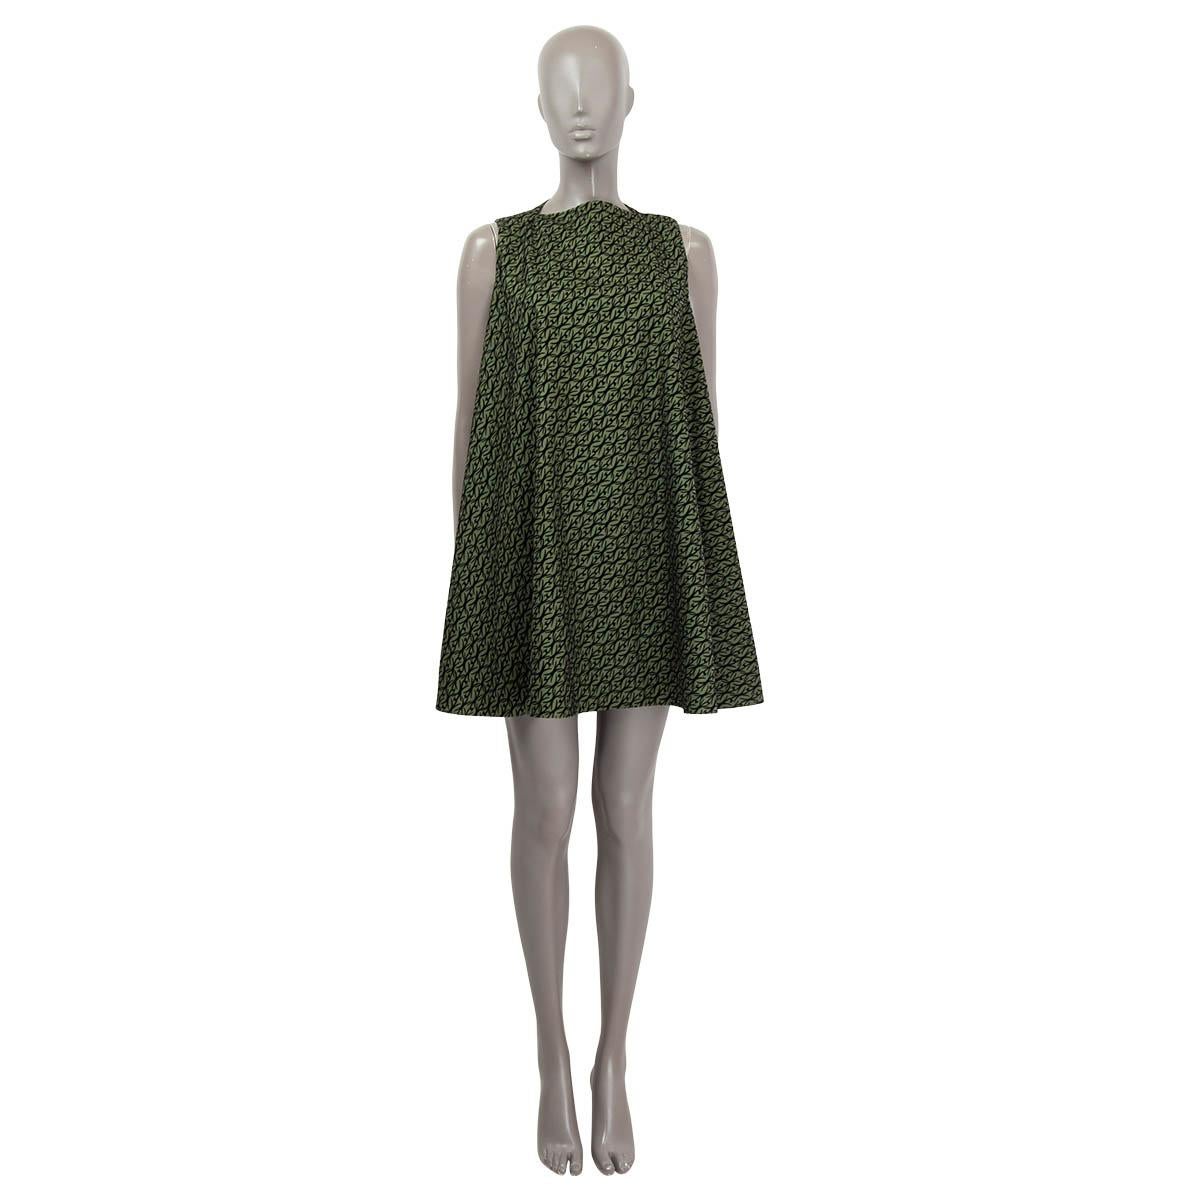 100% authentic Alaïa wide A-line dress in forest green wool (90%) and polyamide (10%) with a black velvet pattern. Lined in green silk (95%) and lycra (5%). Opens with hidden buttons on the shoulder. Has been worn and is in excellent condition.